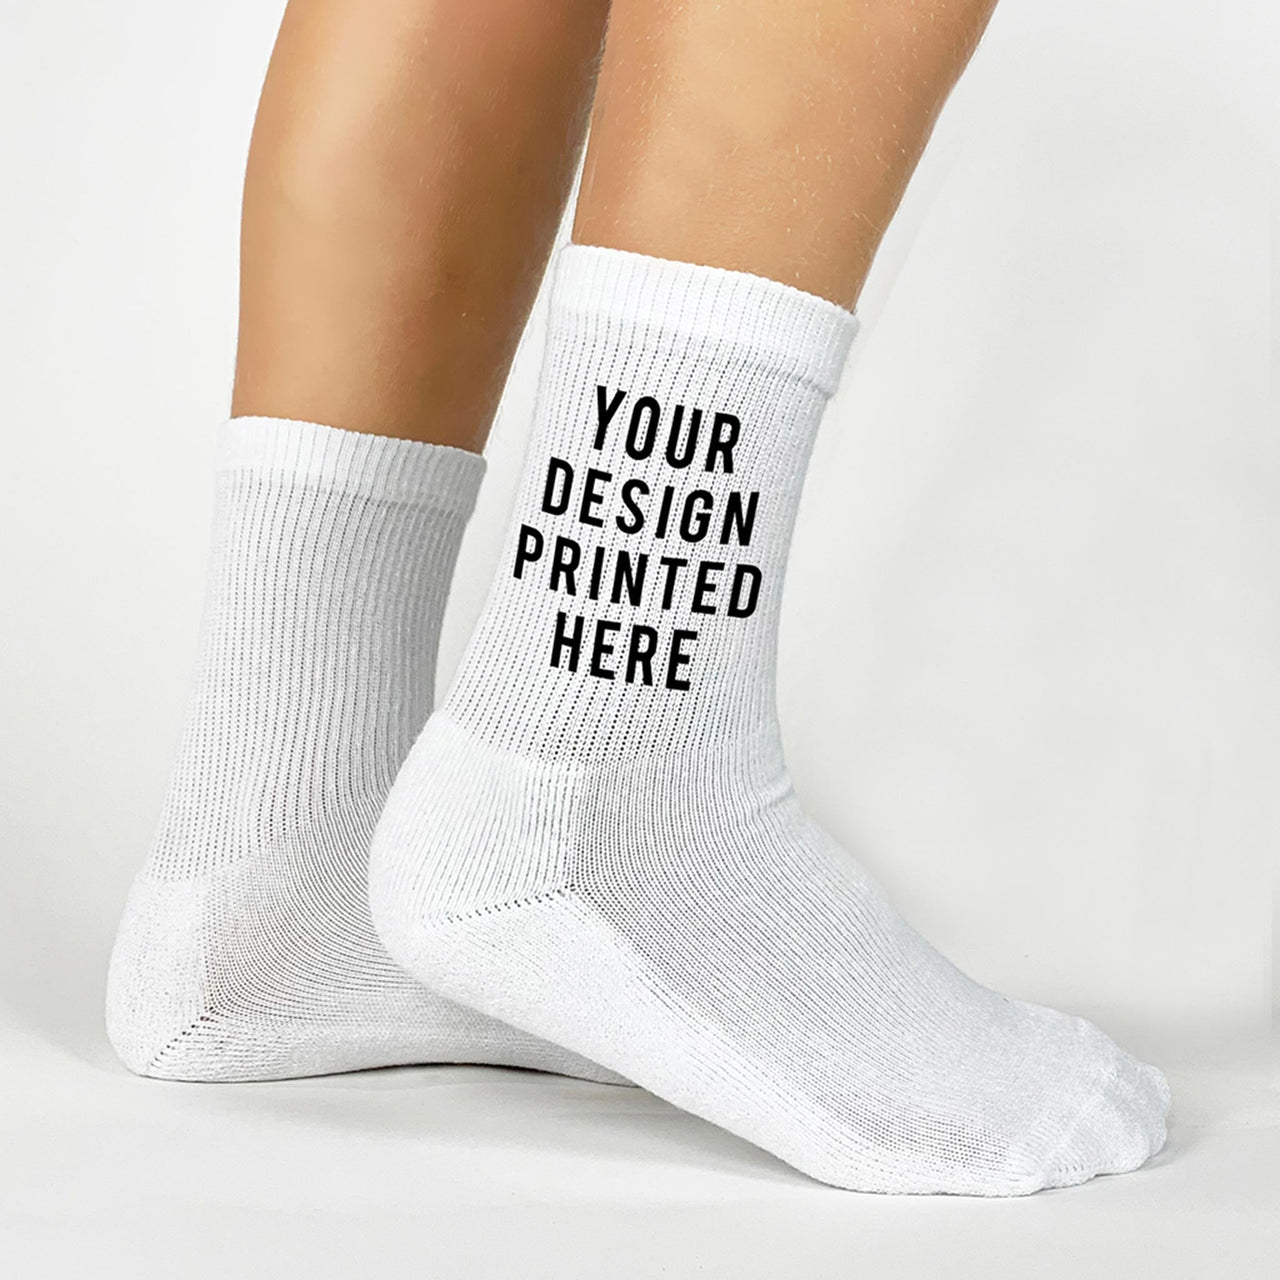 customize your own cotton crew socks for kids ages 5-9